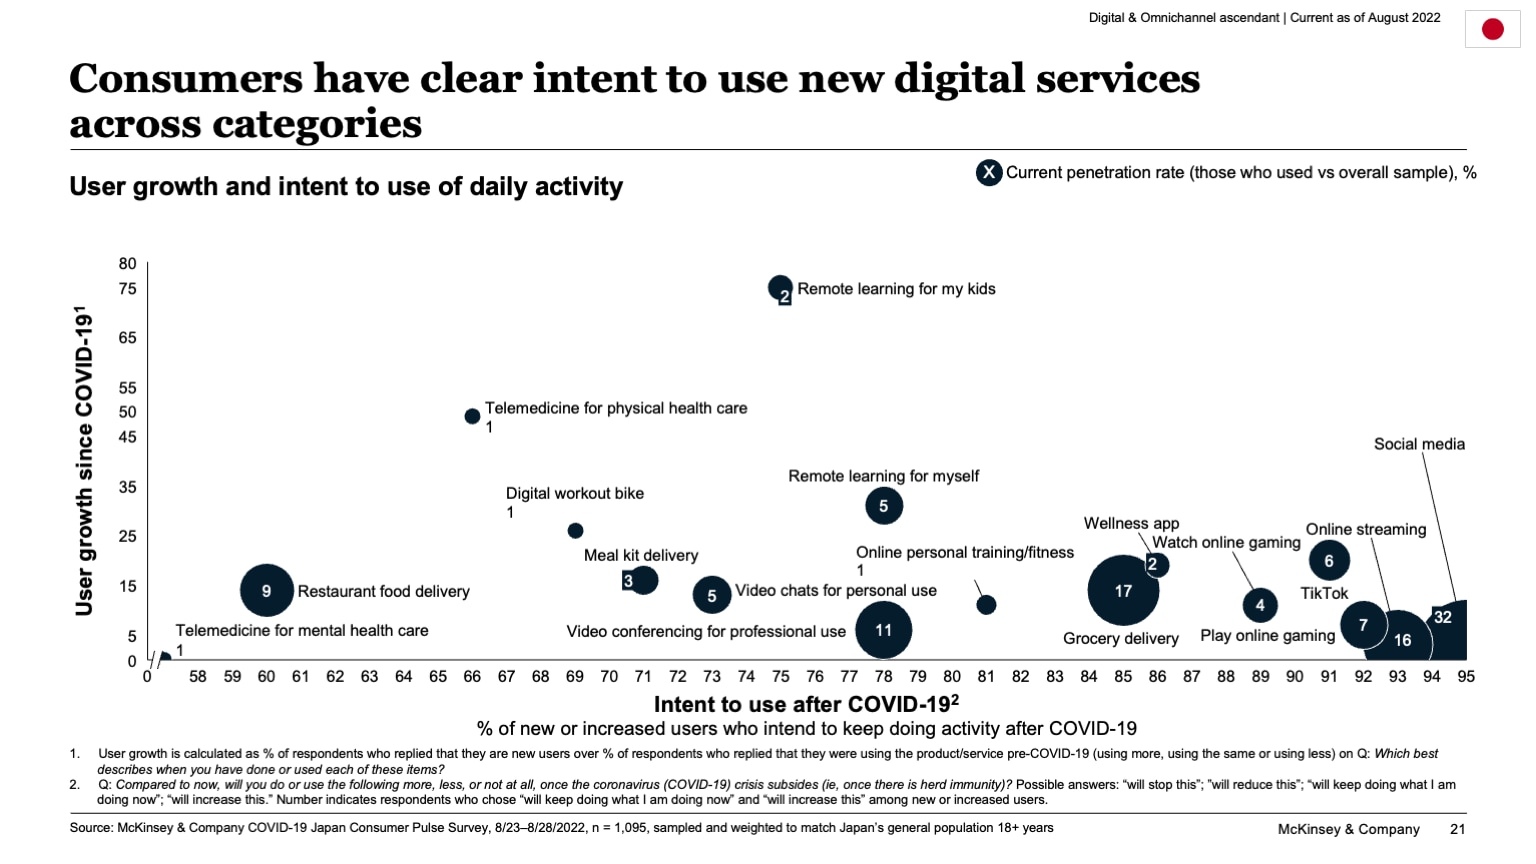 Consumers have clear intent to use new digital services across categories